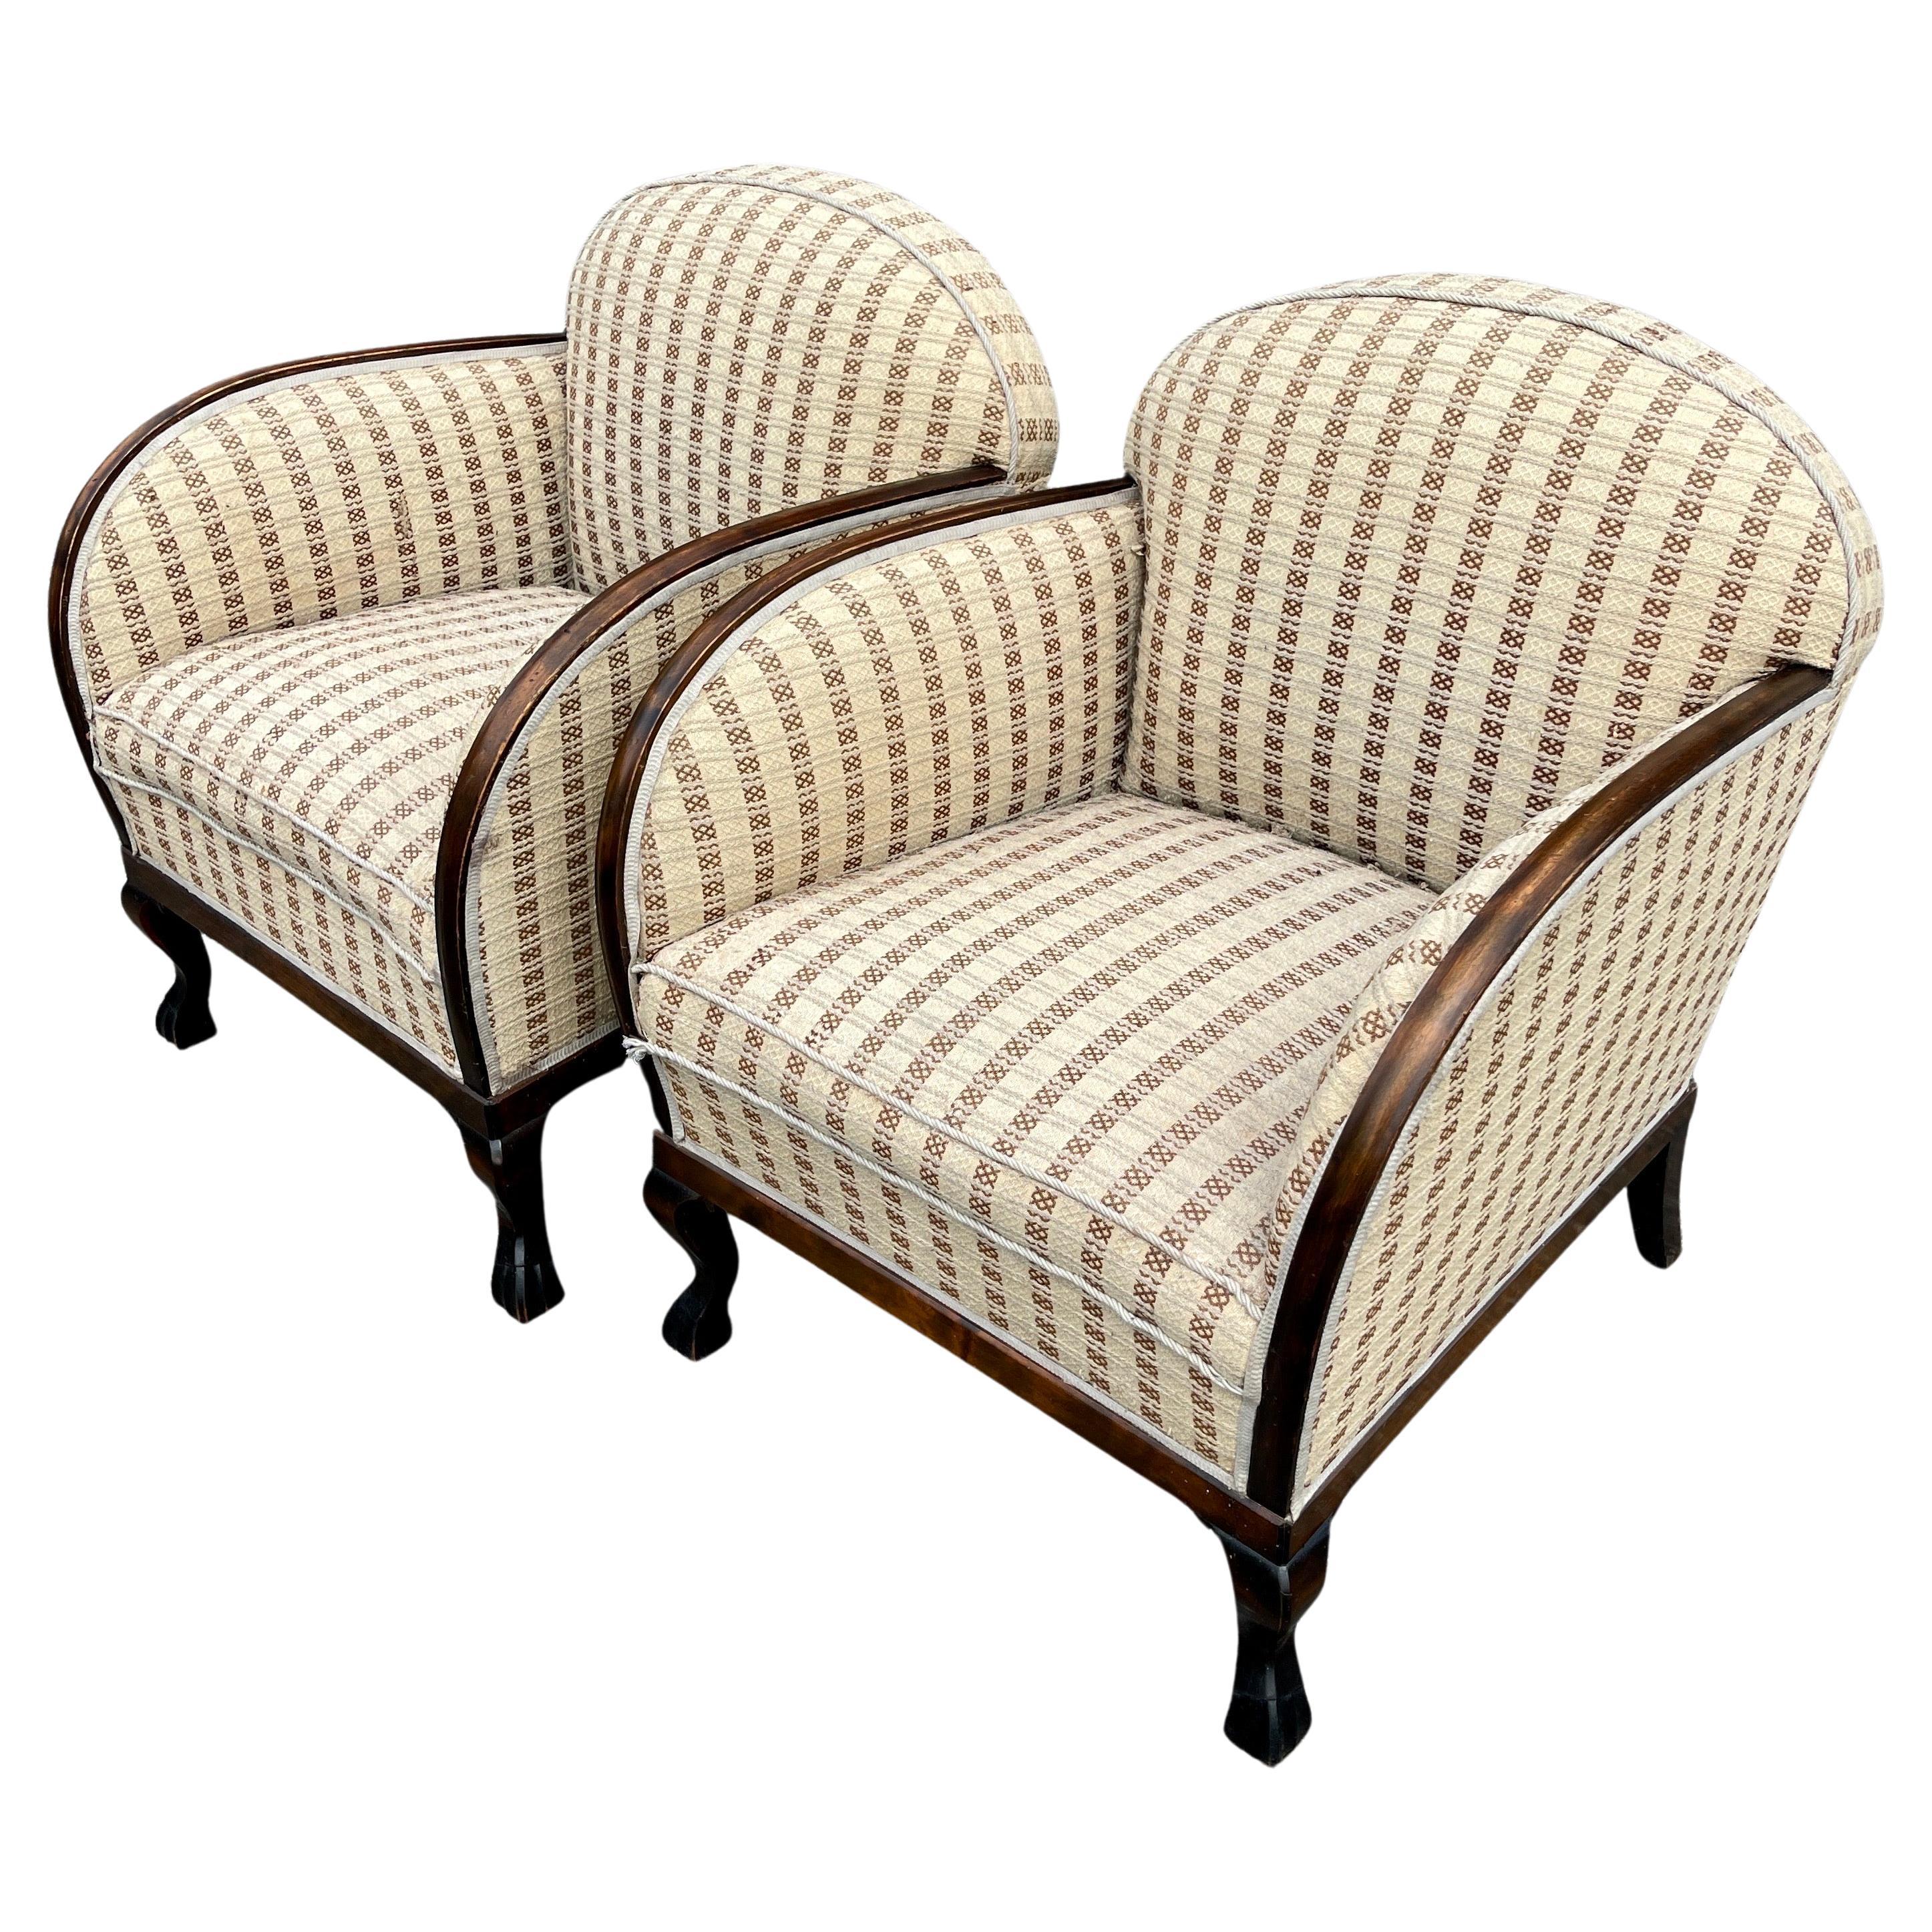 French Art Deco Pair of Lounge Chairs, 1930's
 
This vintage pair has wonderful curves and details. They are a very solid pair with their original upholstery. These club chairs have great presence to them as is but could also redone. 